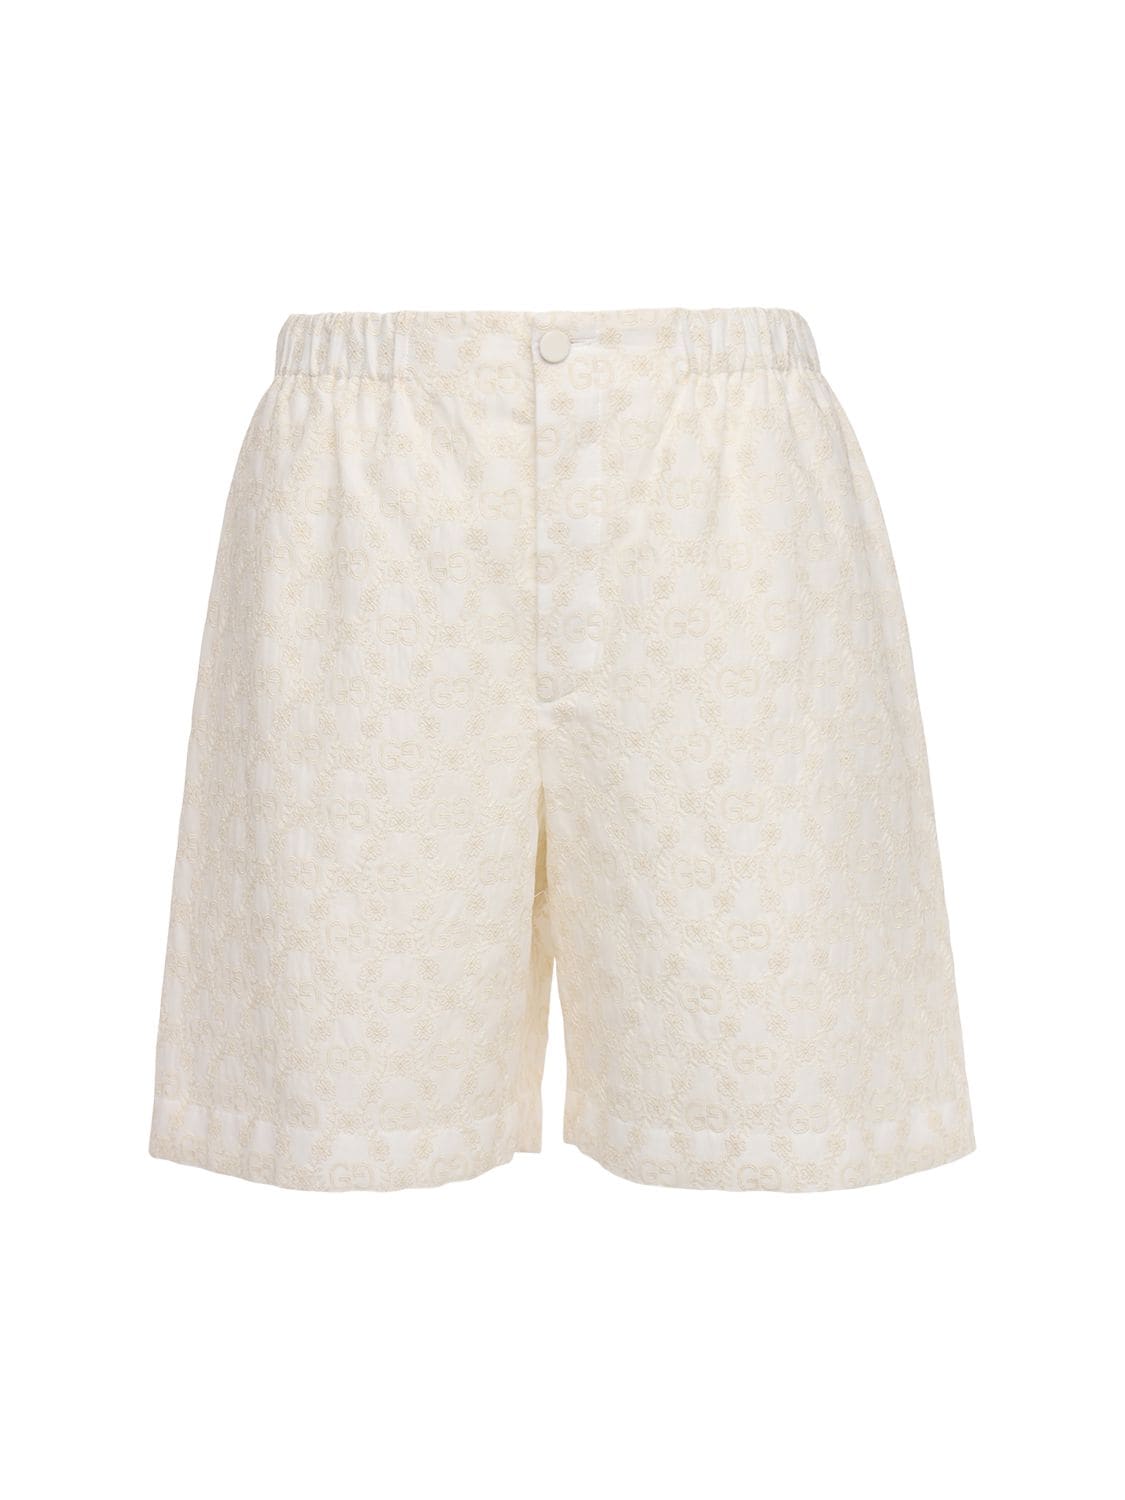 Gucci Gg Embroidery Cotton Lace Shorts In Ivory